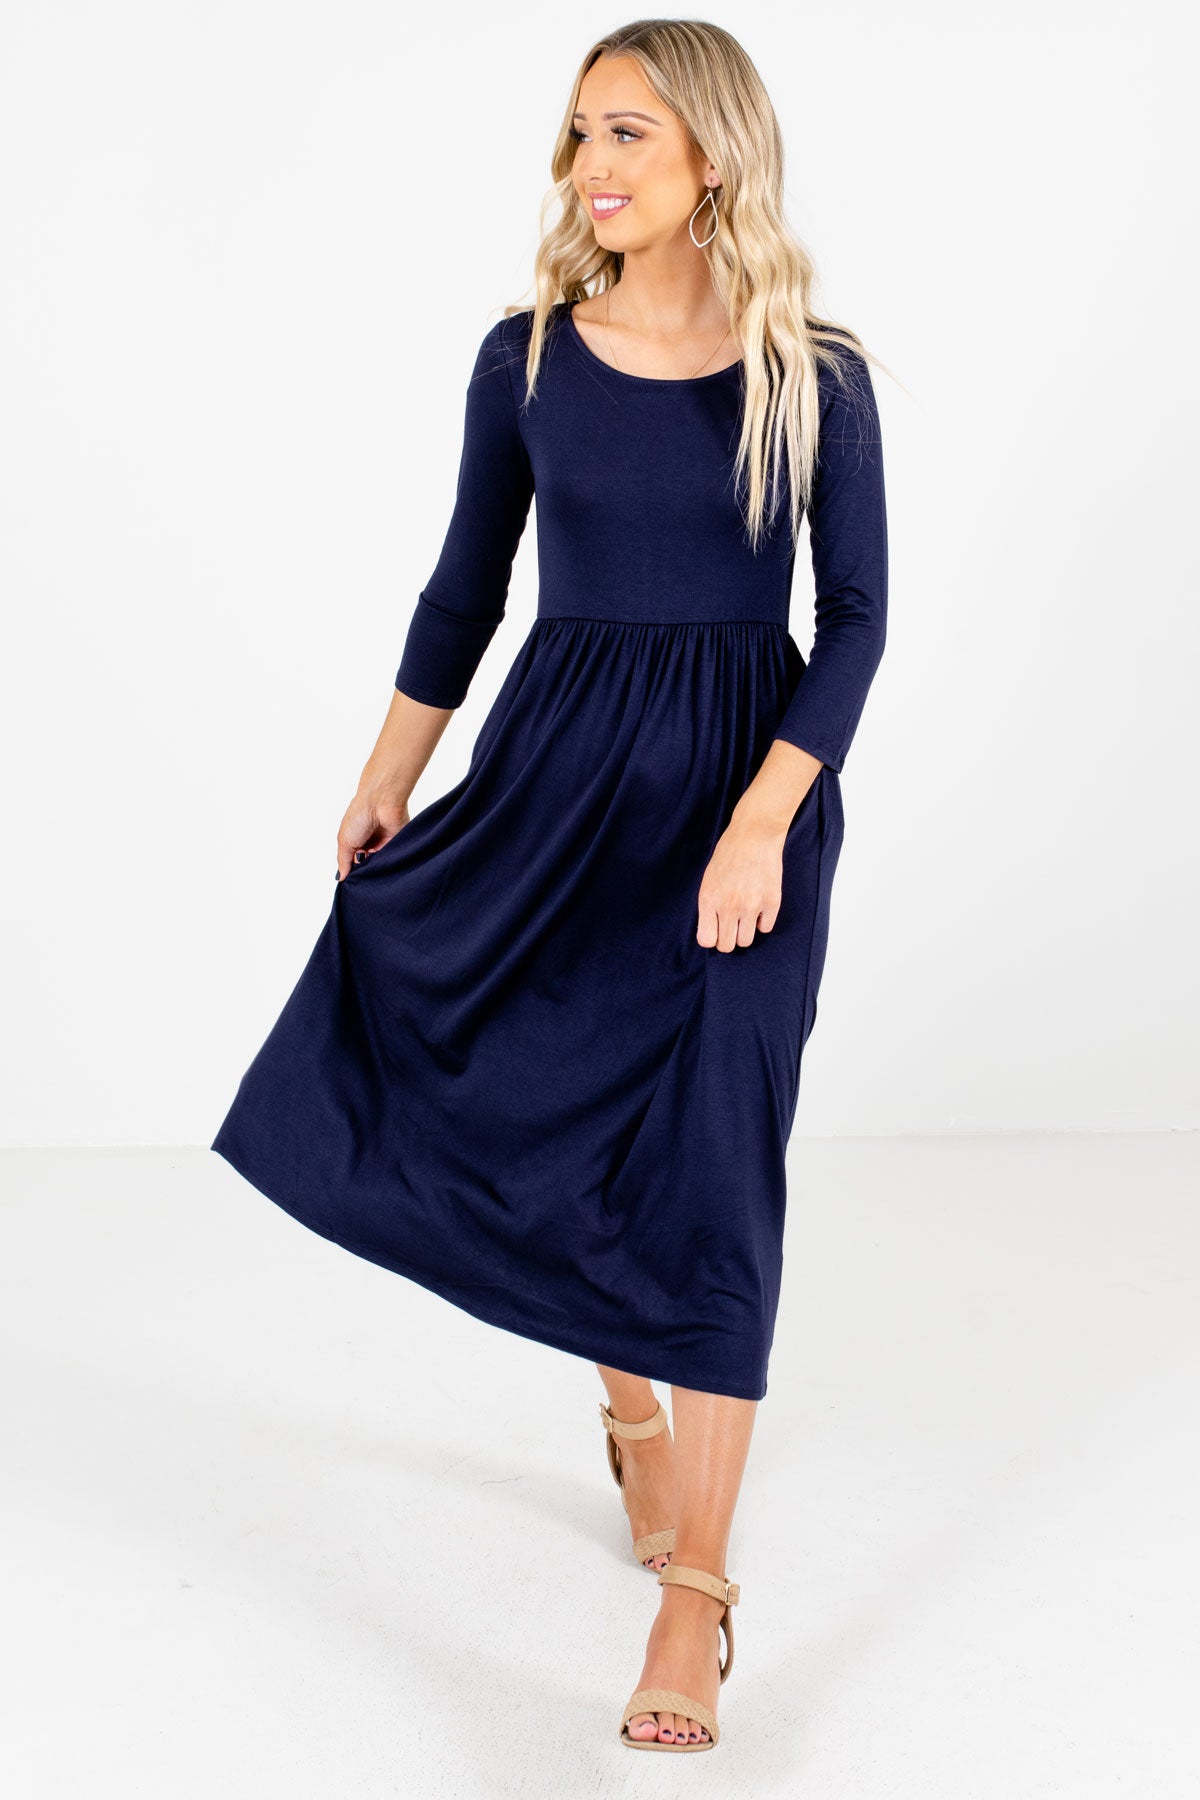 Women’s Navy Blue High-Quality Material Boutique Midi Dress